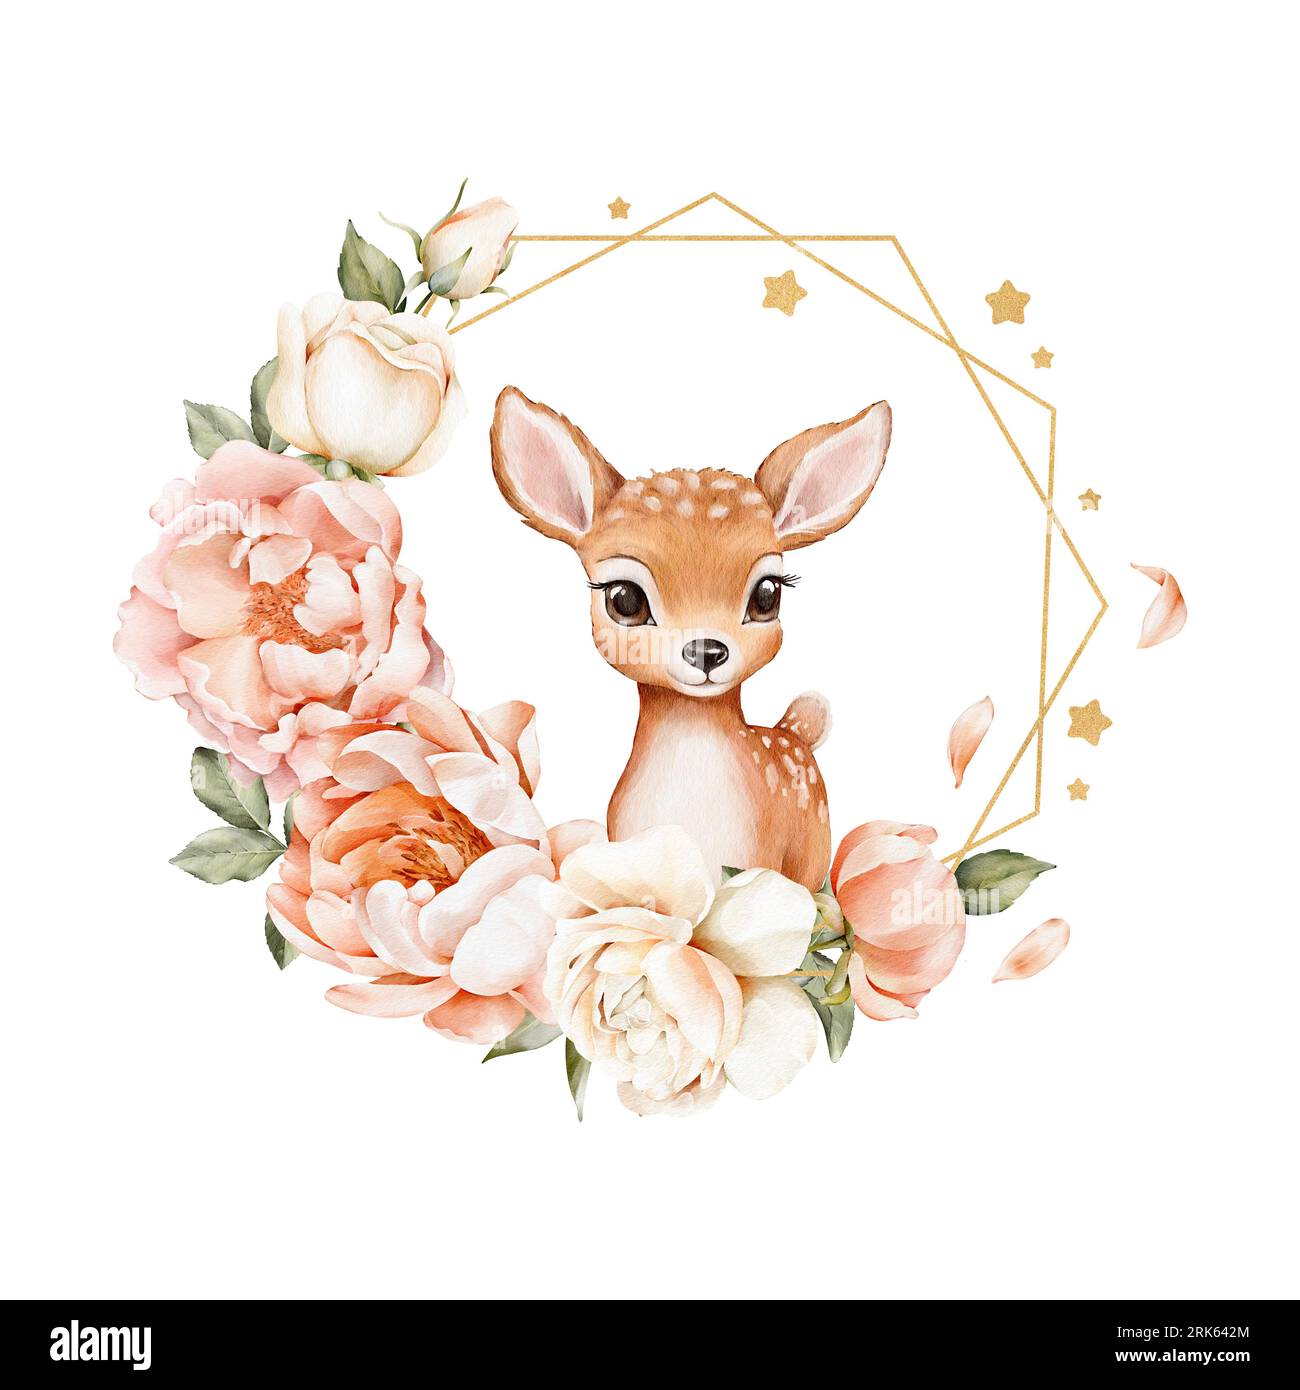 Watercolor composition with cute deer, delicate flowers, leaves and gold frame. Illustrations for invitations, cards, anniversary, birthday, greetings Stock Photo